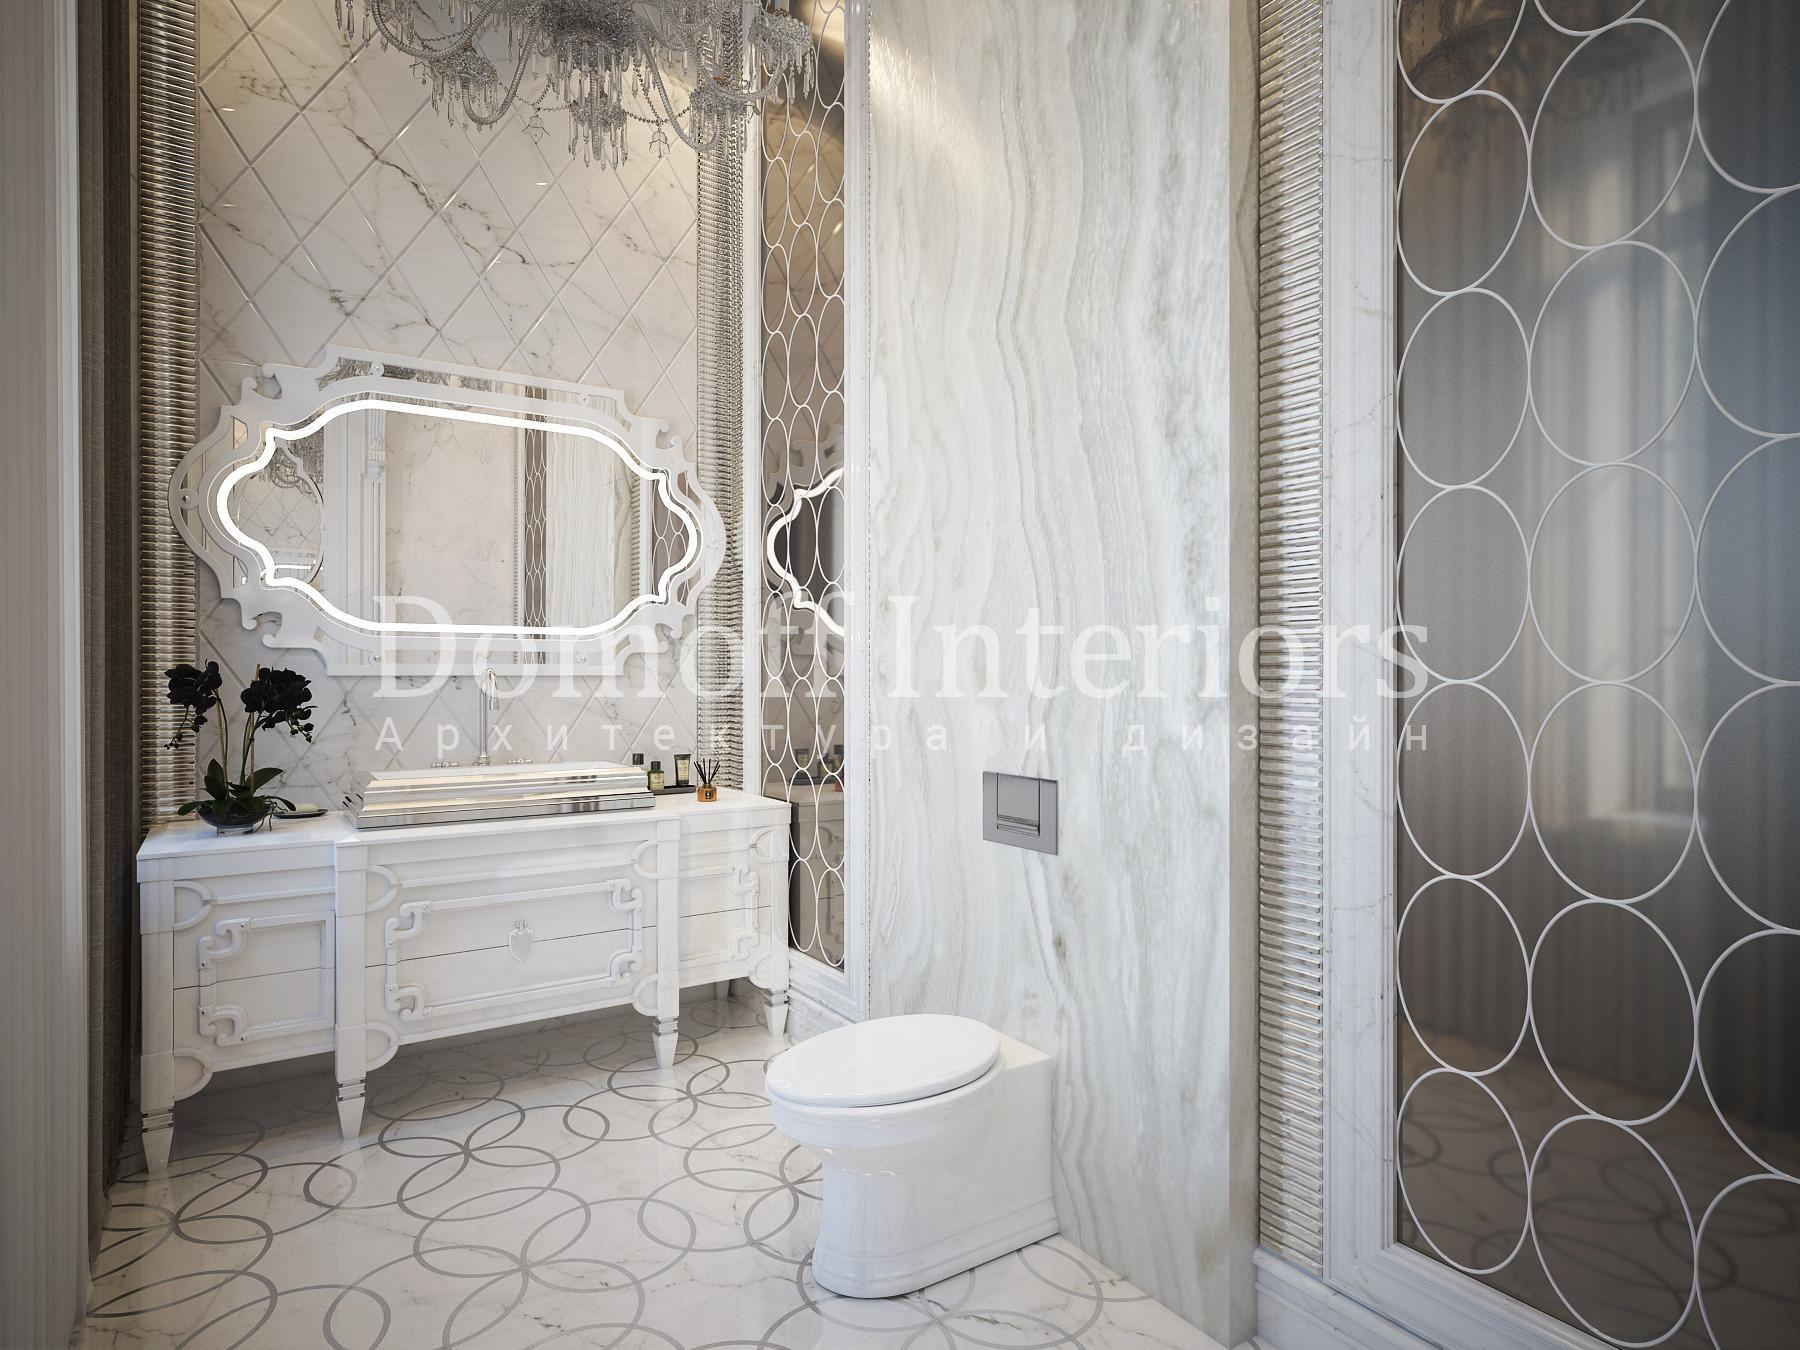 Living room's bathroom made in the style of Contemporary classics